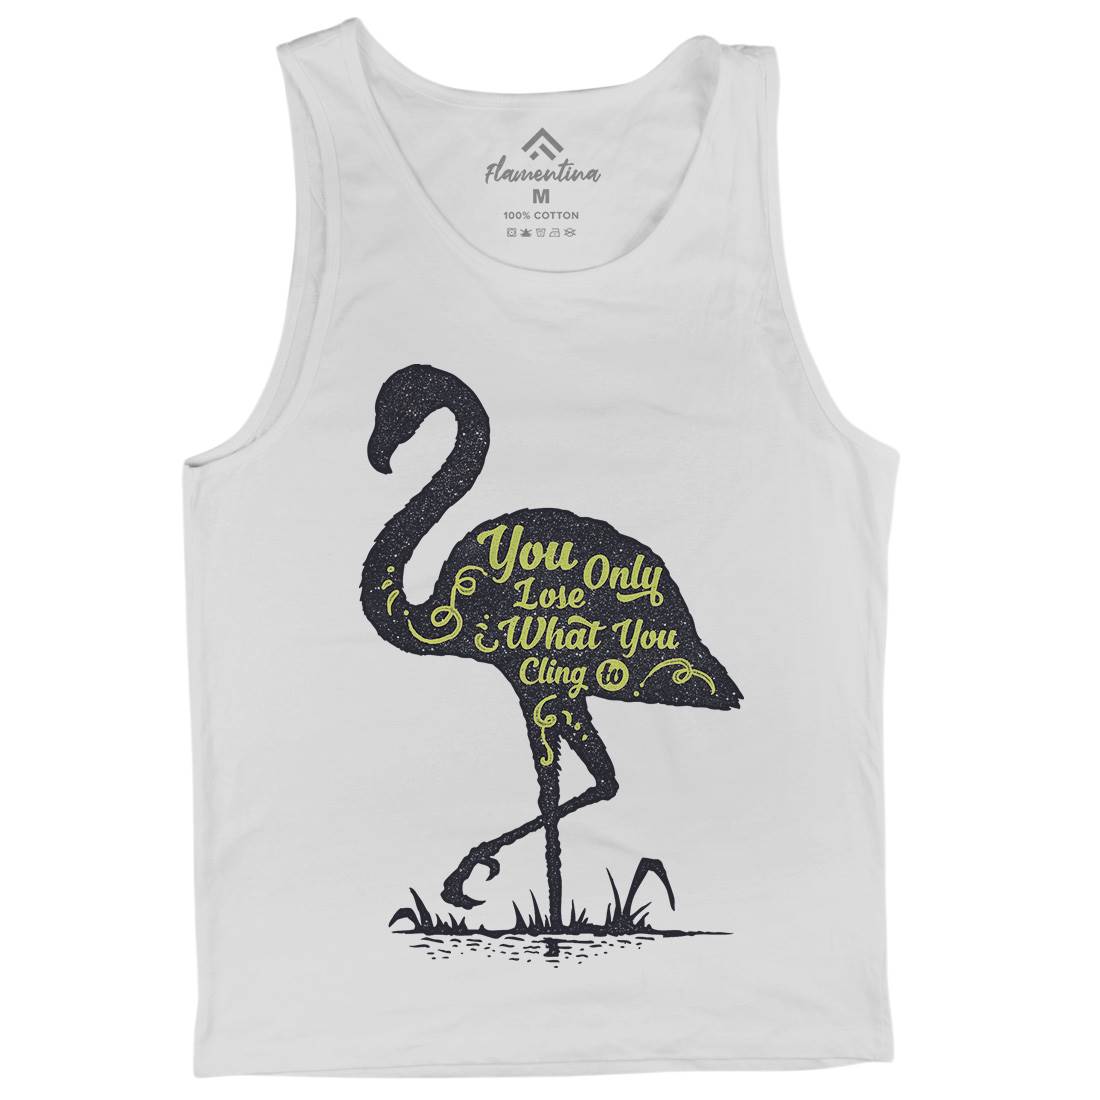 You Only Lose Mens Tank Top Vest Quotes A395